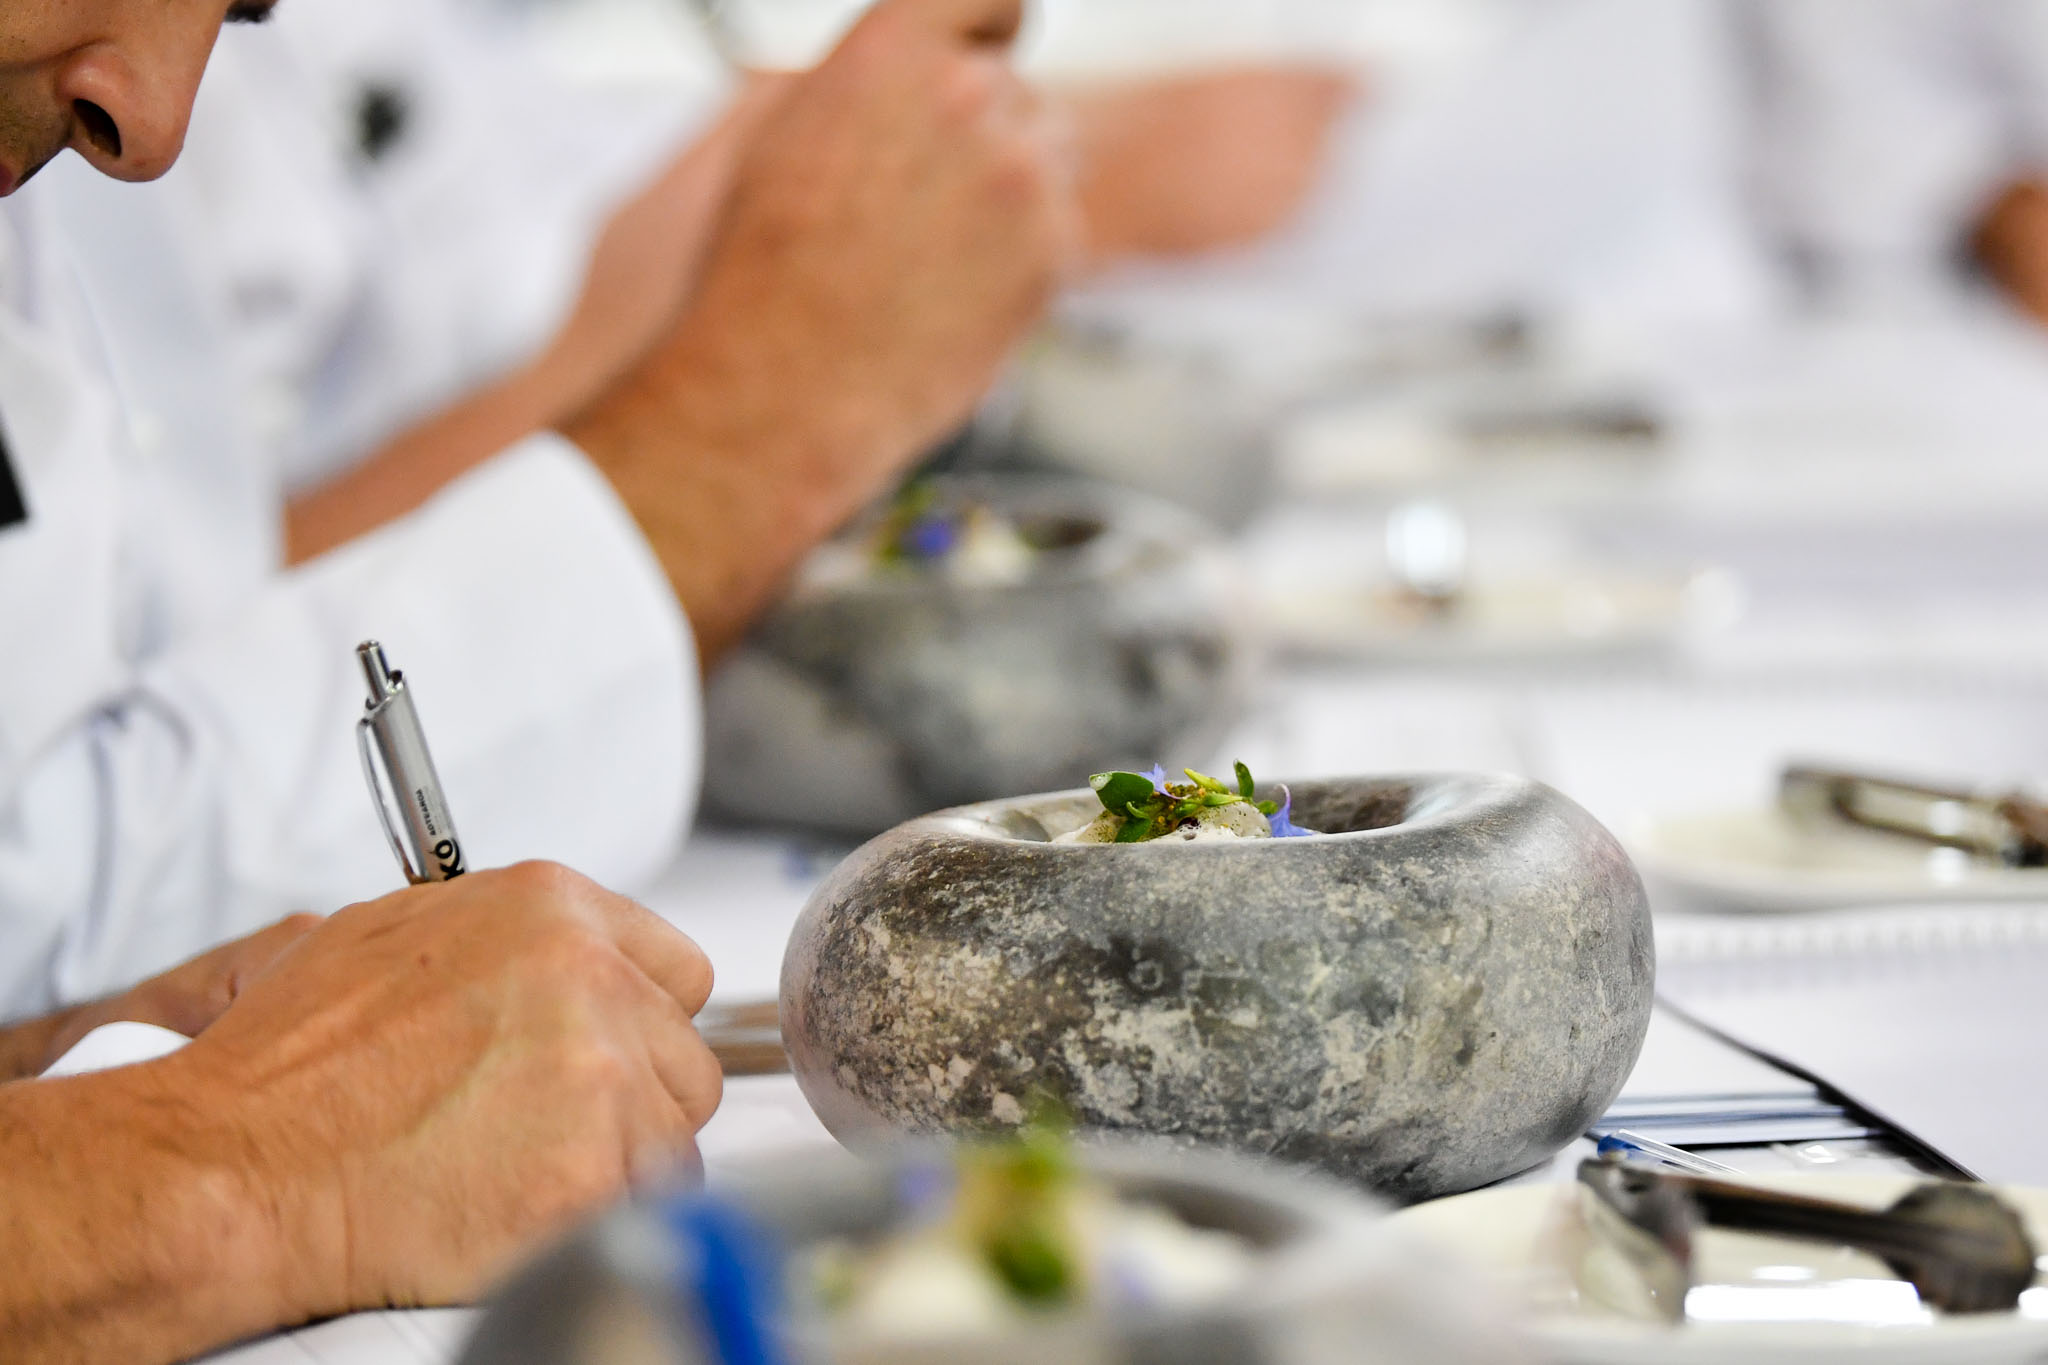 Melbourne, 30 May 2017 - The judges prepare to taste the fish dish of Michael Cole of the Georgie Bass Café & Cookery in Flinders at the Australian selection trials of the Bocuse d'Or culinary competition held during the Food Service Australia show at the Royal Exhibition Building in Melbourne, Australia. Photo Sydney Low